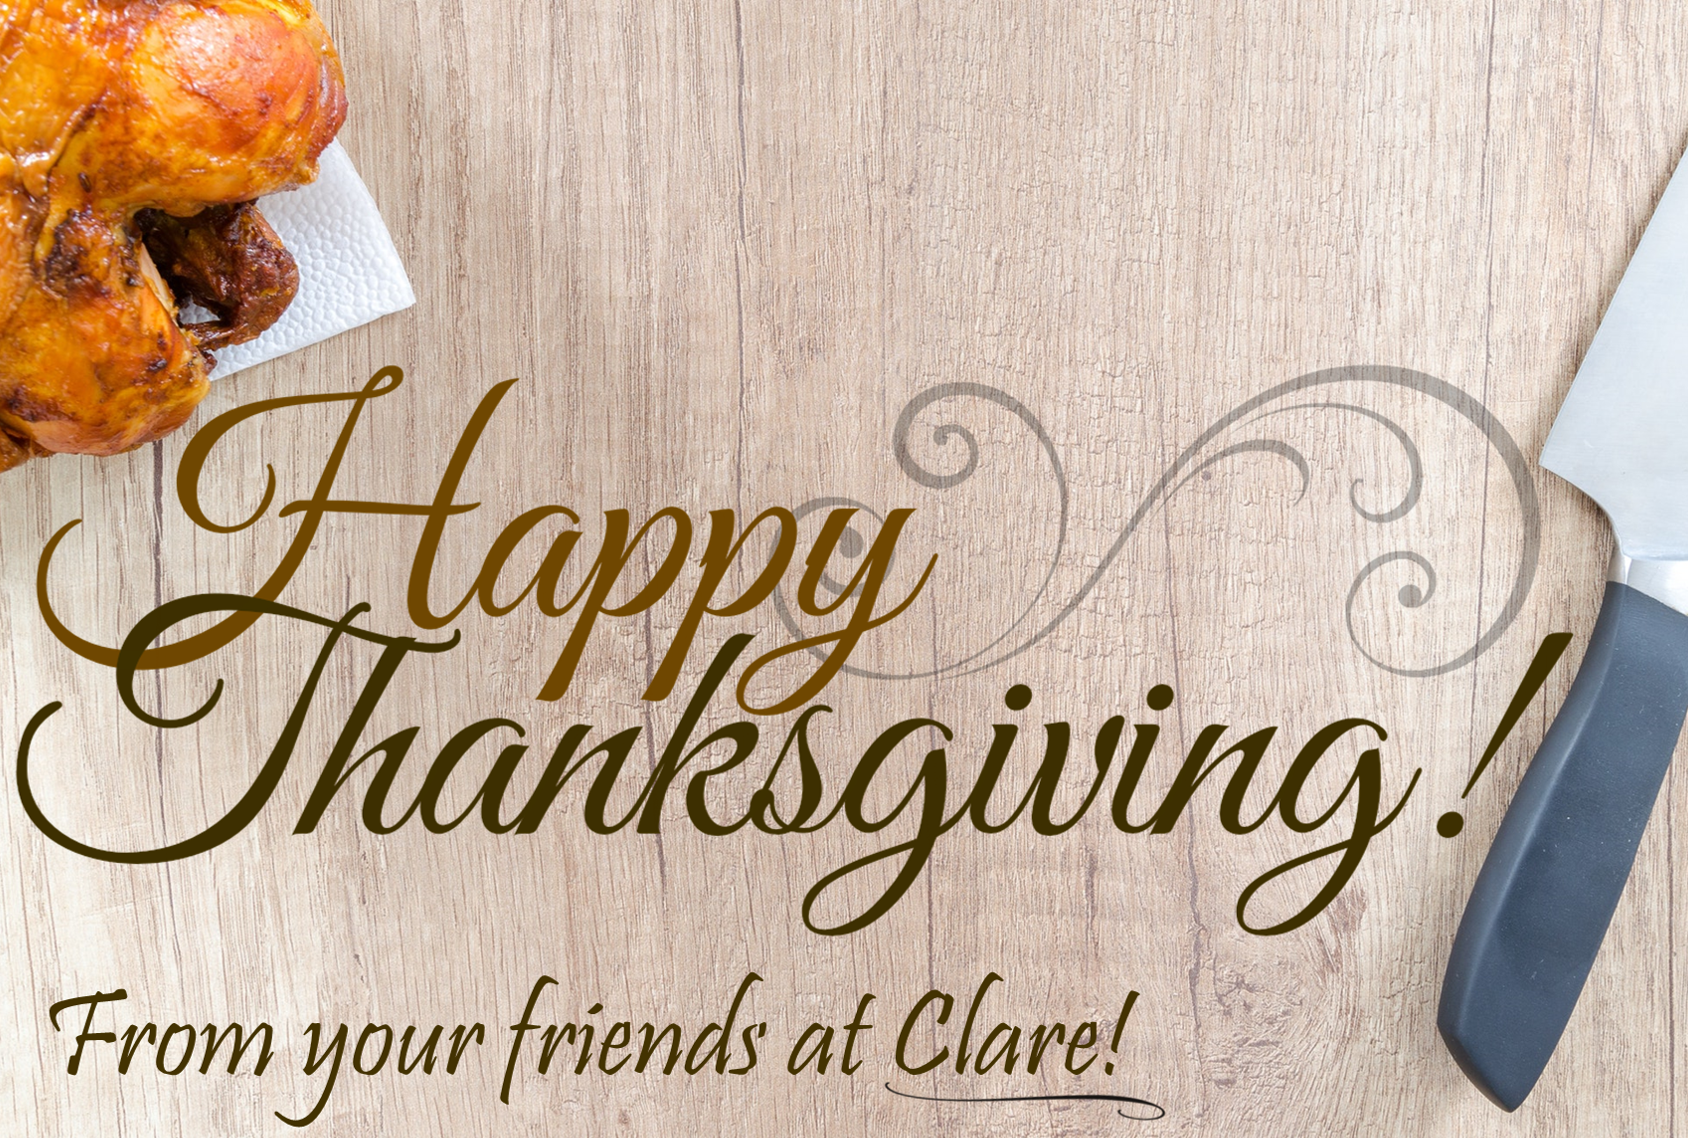 Happy Thanksgiving From Clare!